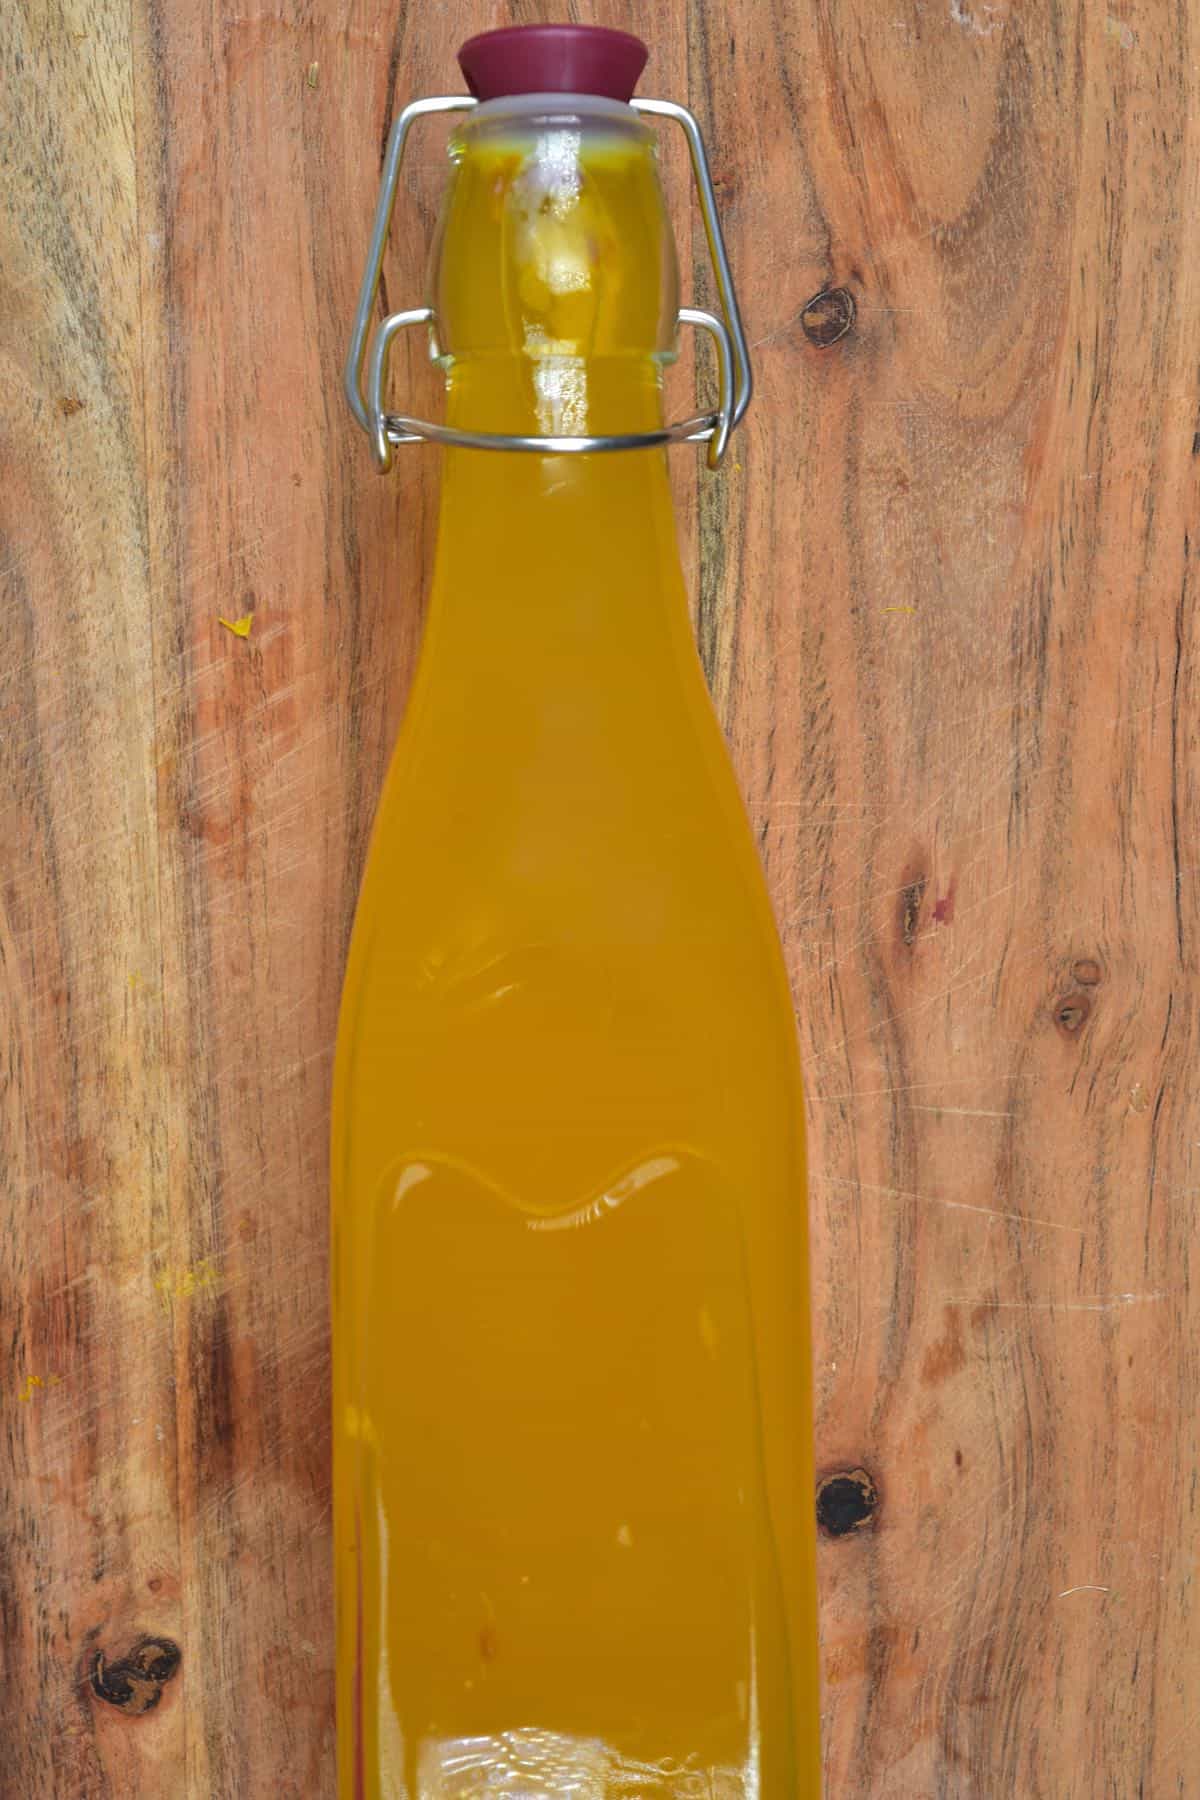 A bottle with pineapple tea laying on a wooden board